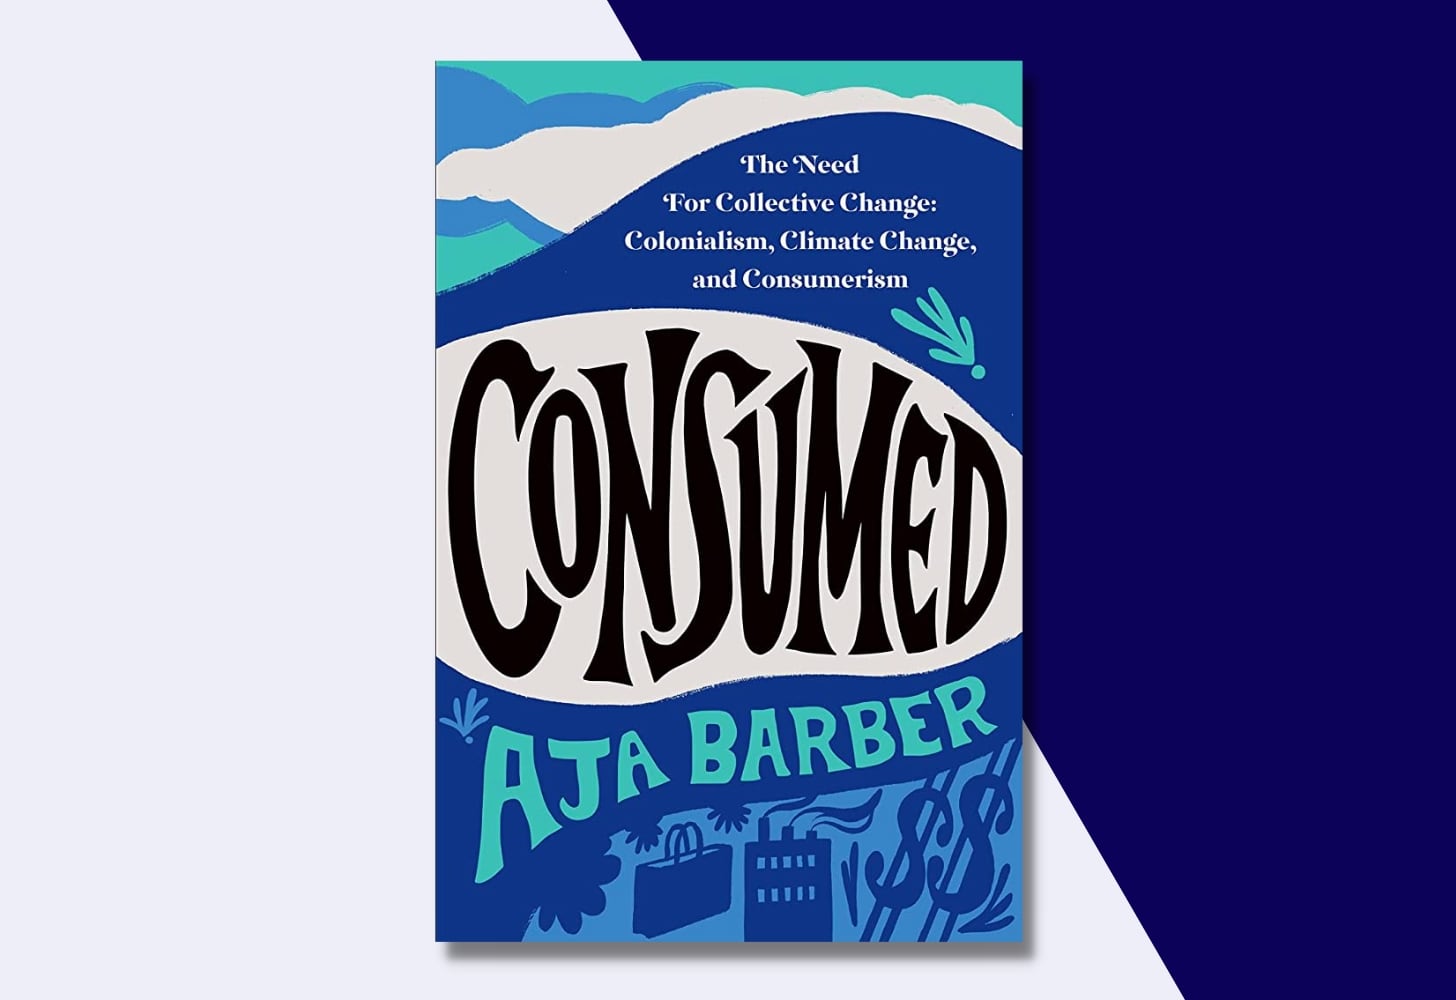 “Consumed: The Need for Collective Change: Colonialism, Climate Change, and Consumerism” by Aja Barber